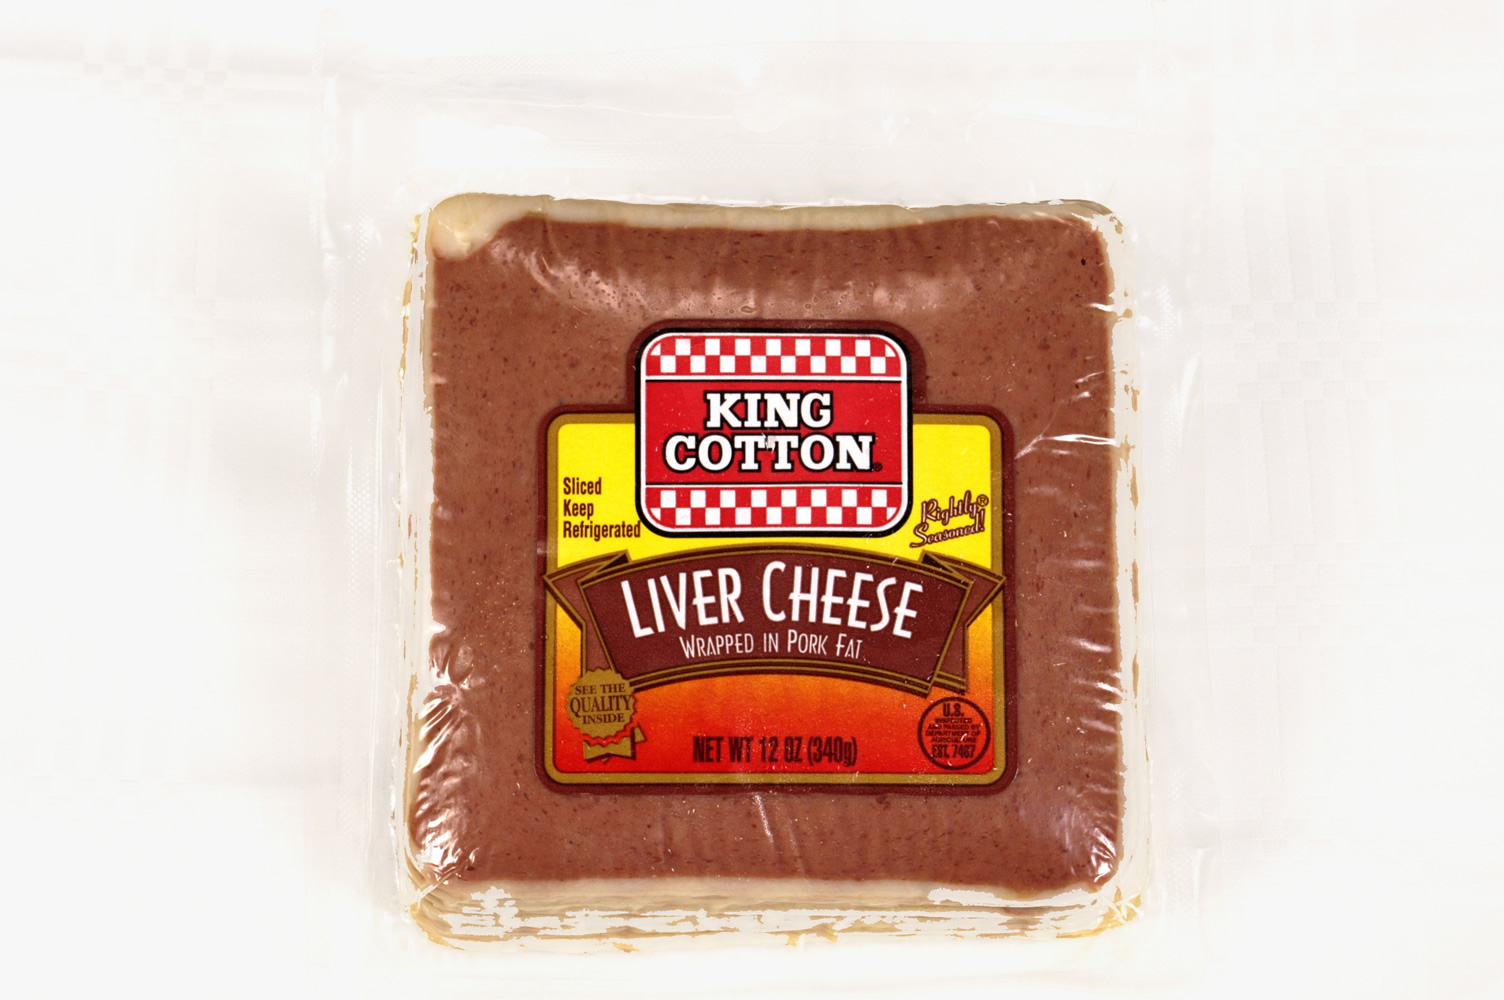 [King+Cotton+Liver+Cheese.jpg]